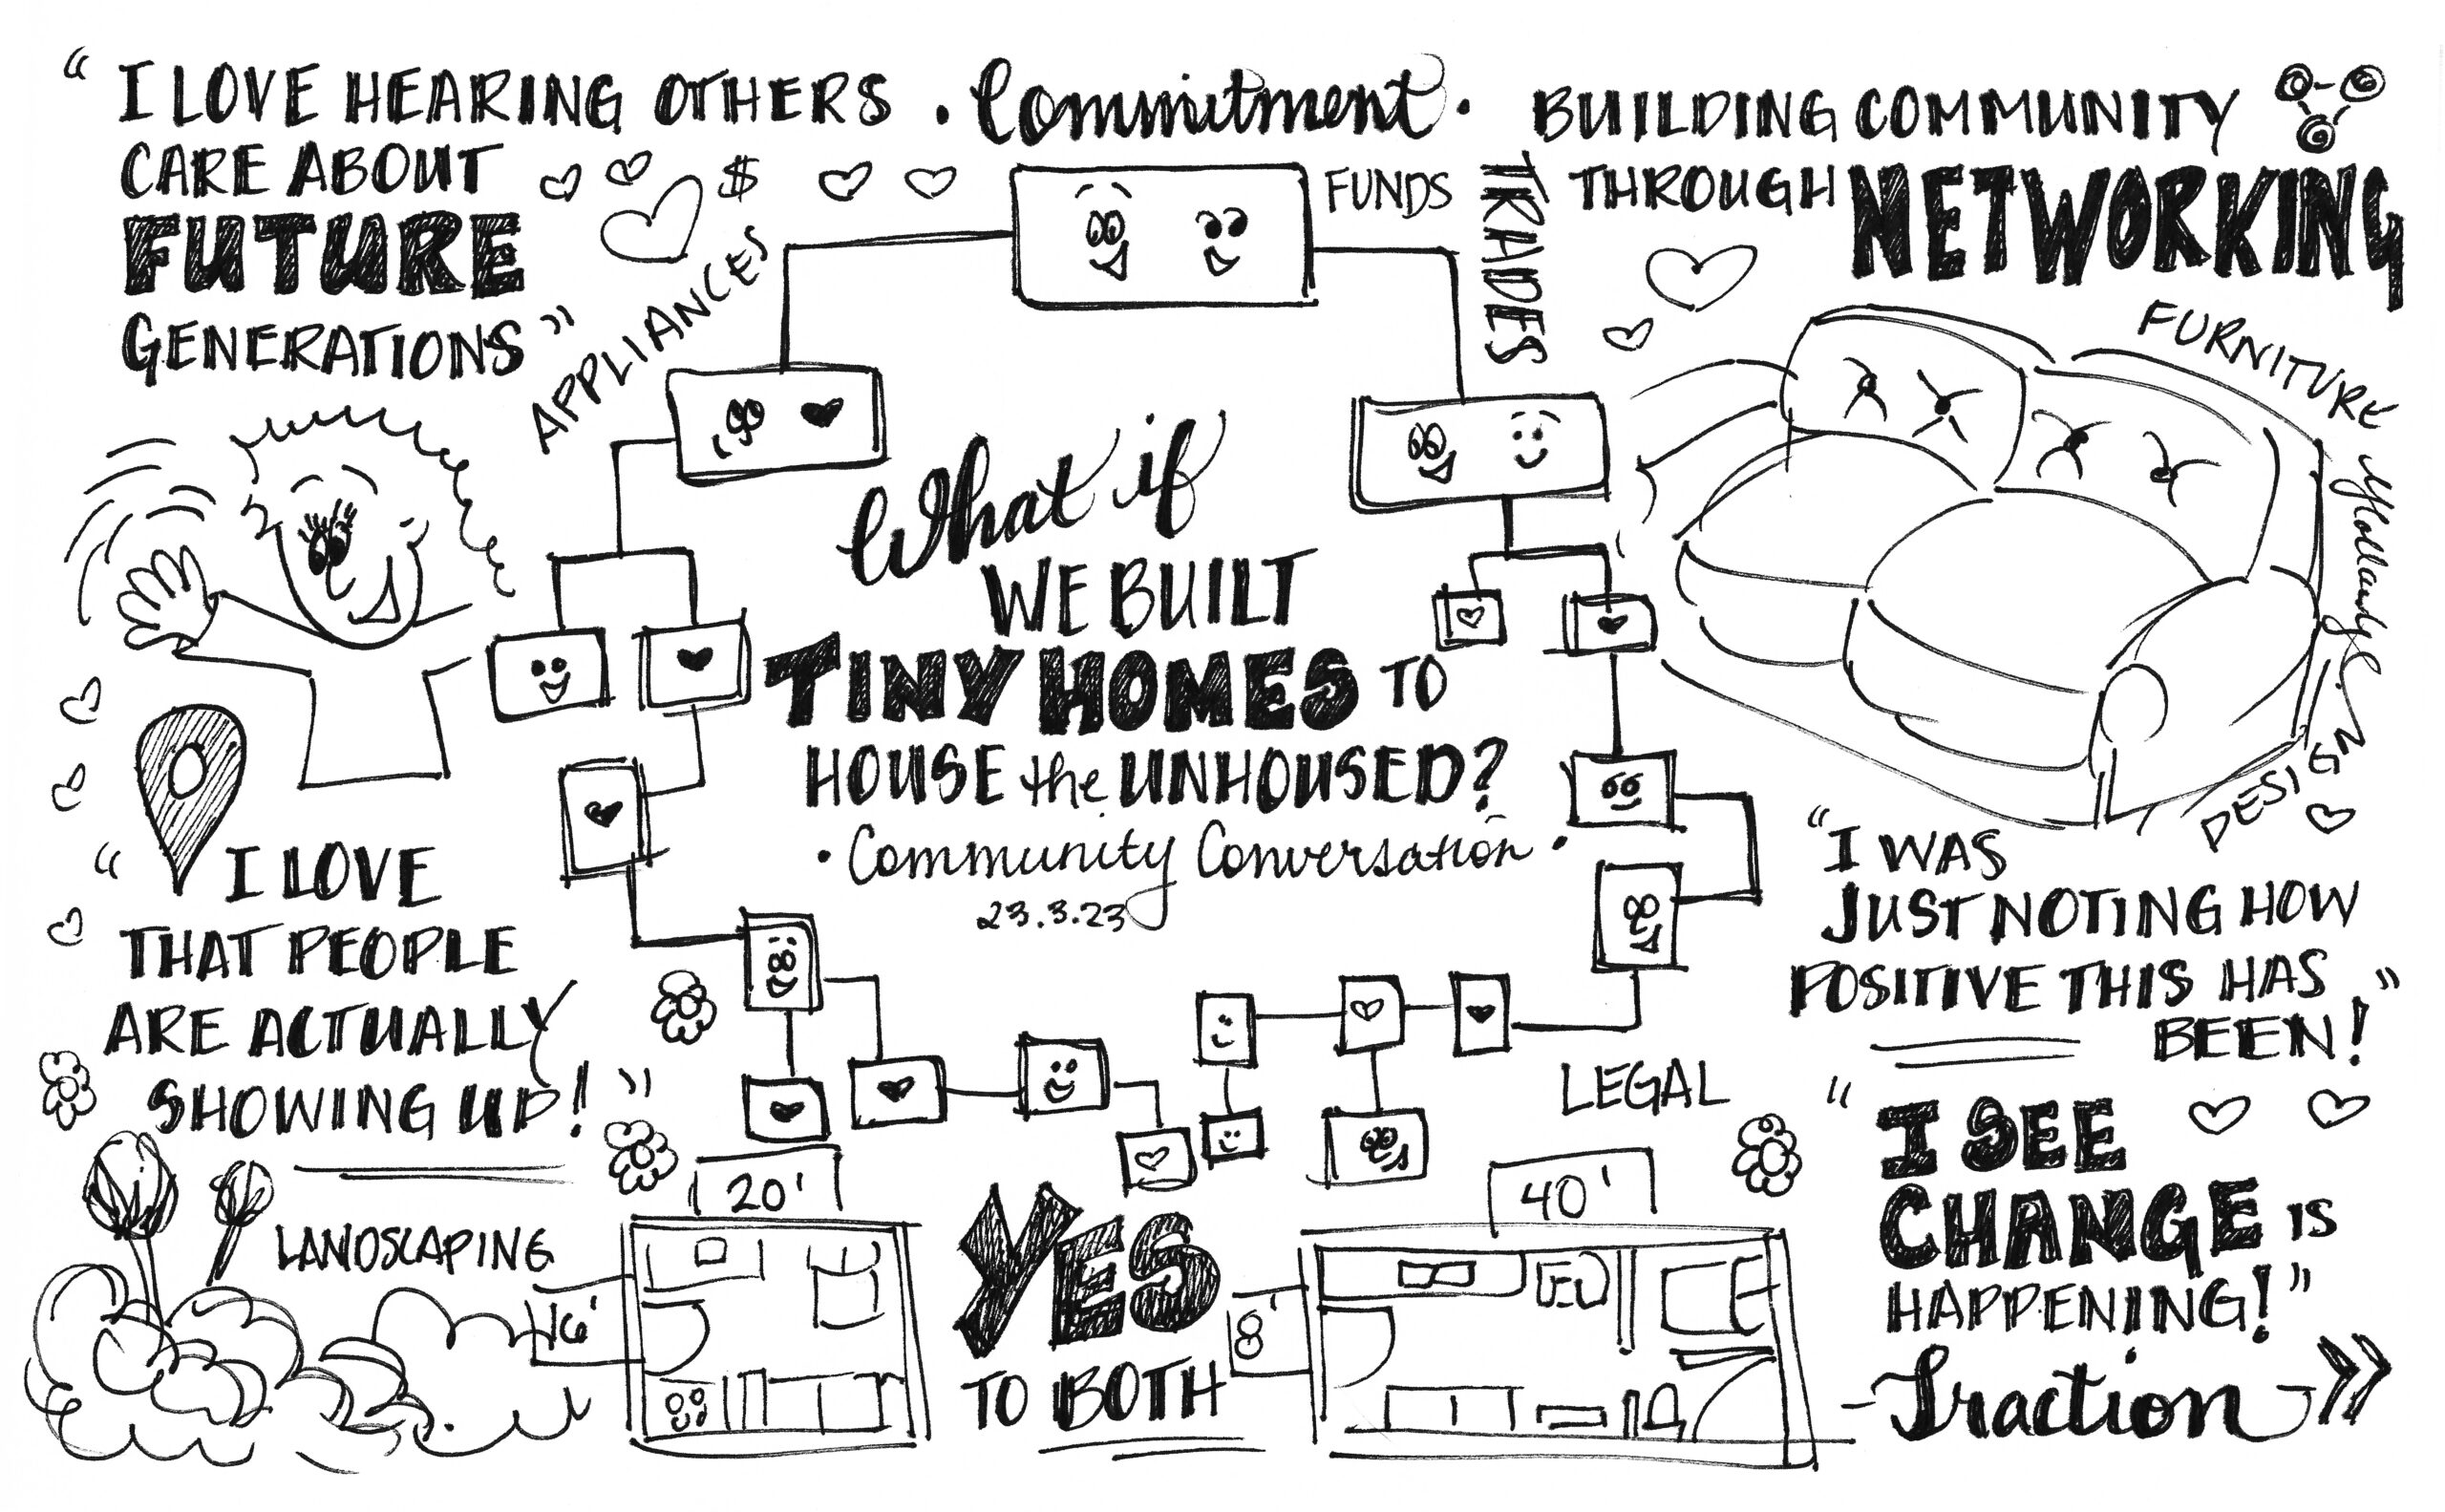 Graphic reflections from the Mar. 23 Tiny Homes Working Circle sketched live during the gathering by Yvonne Hollandy.